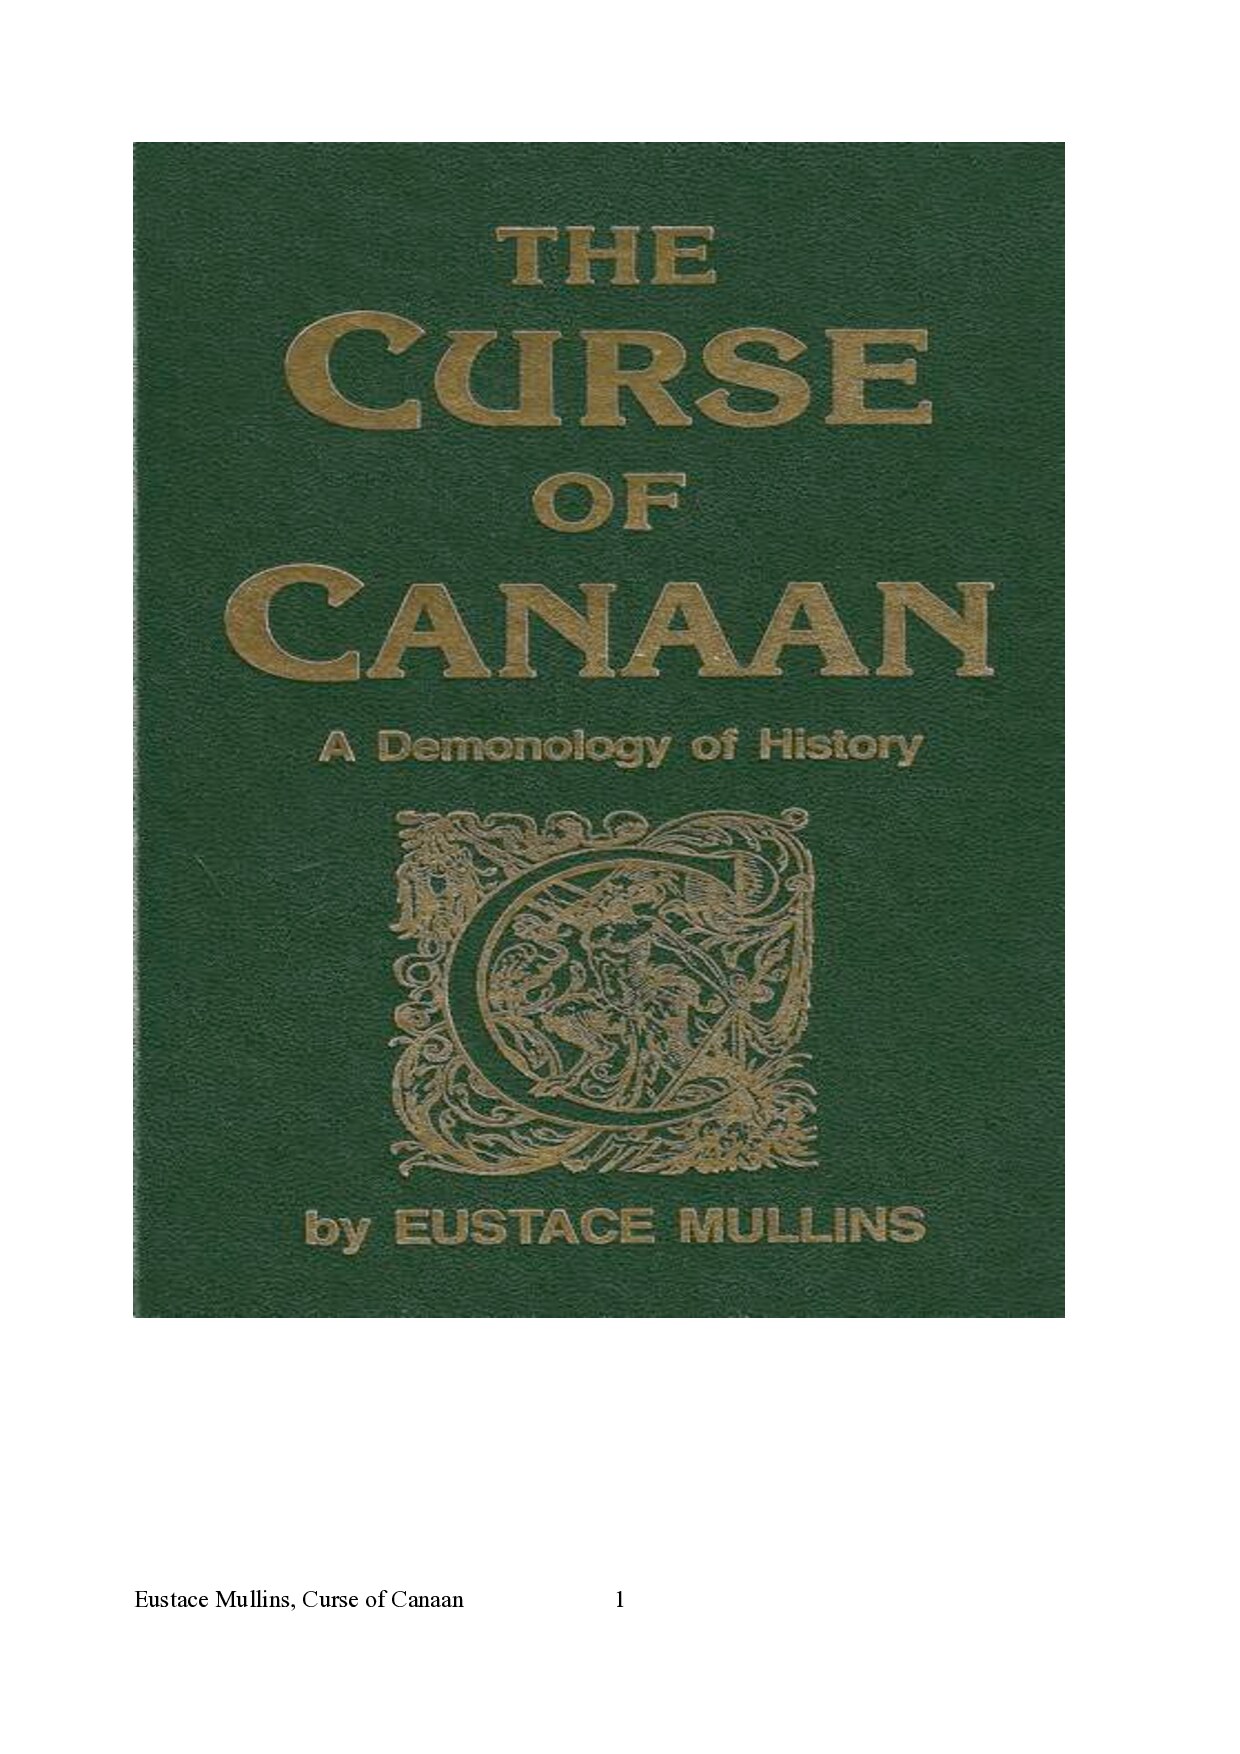 The Curse of Canaan: A Demonology of History  (1987)